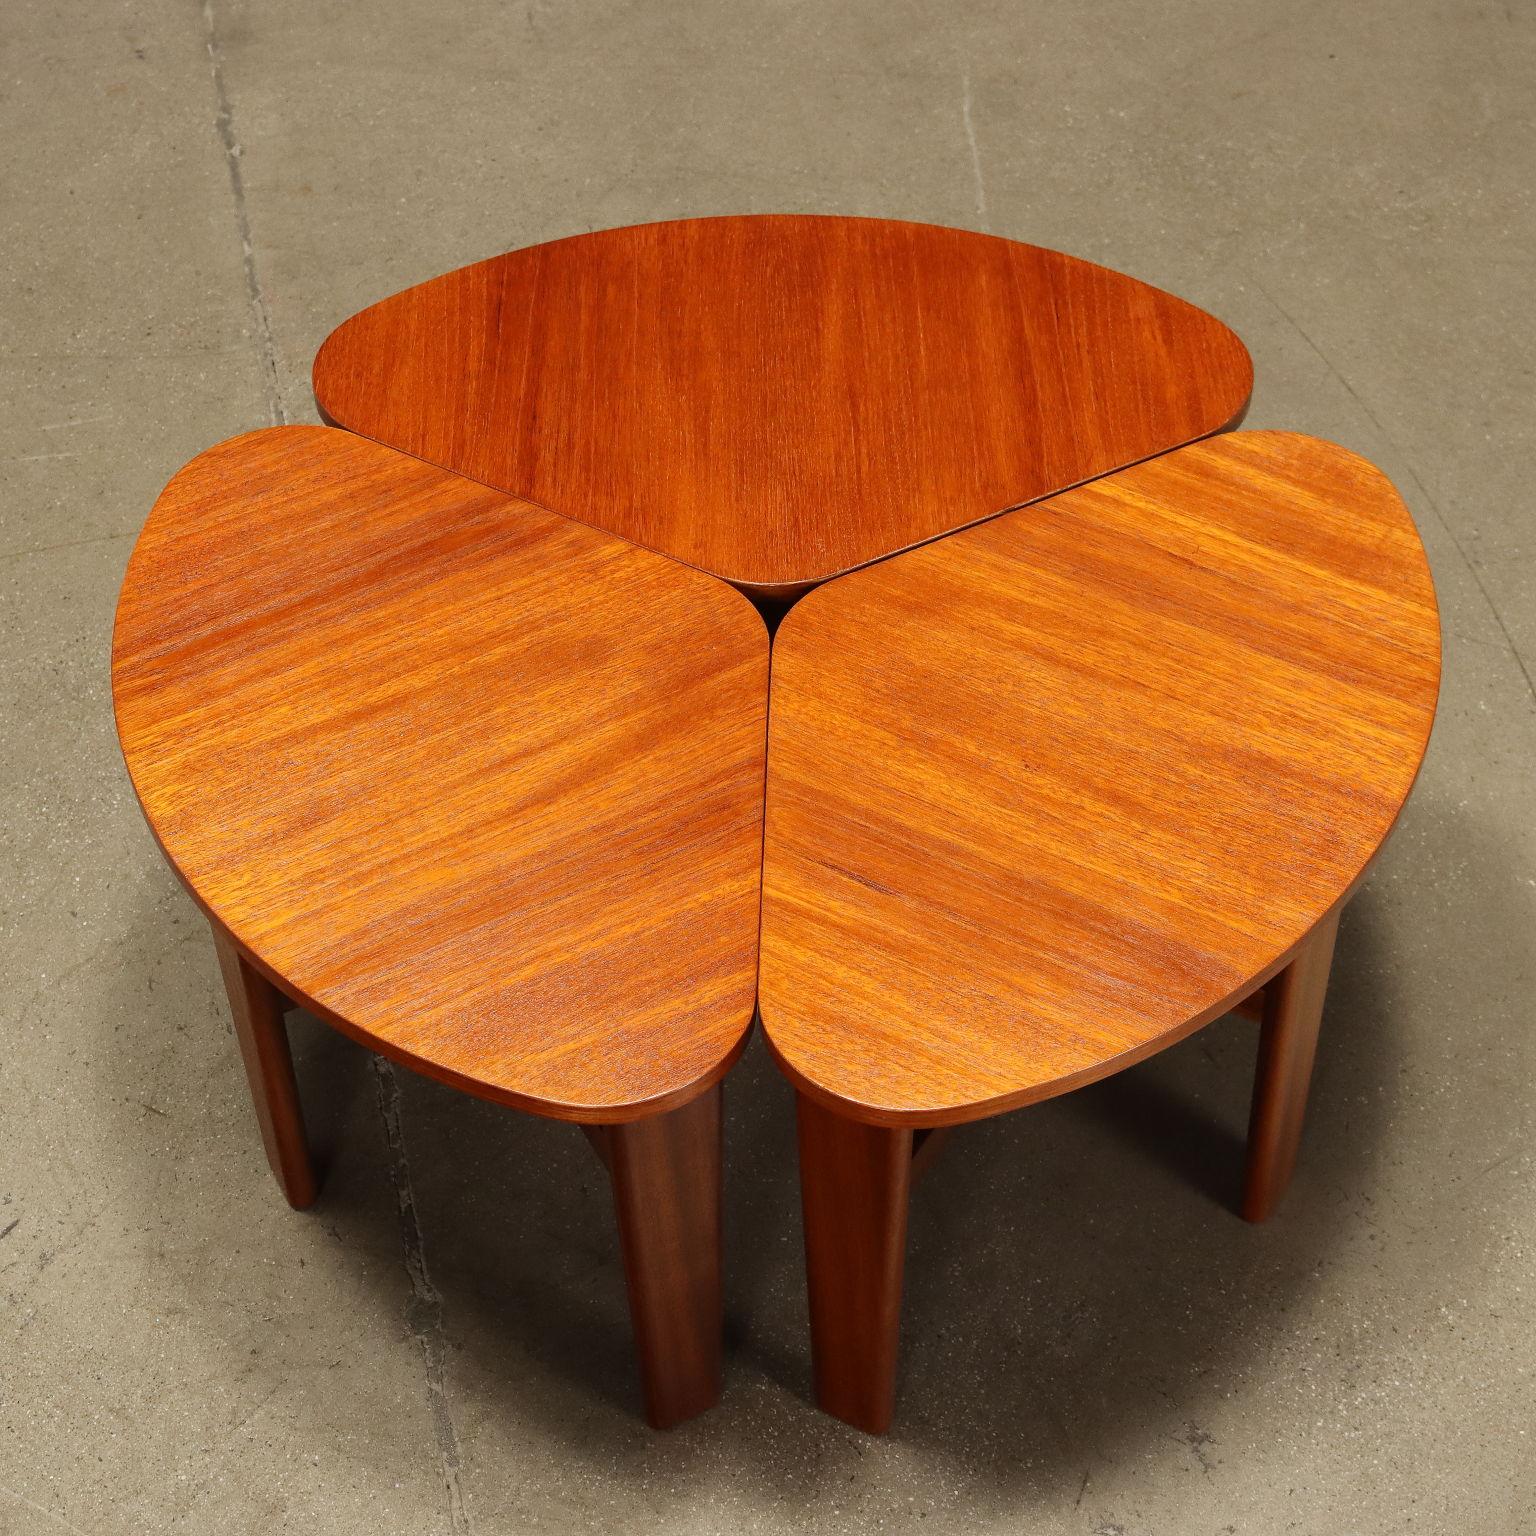 Teak English Coffee Tables from the 1960s